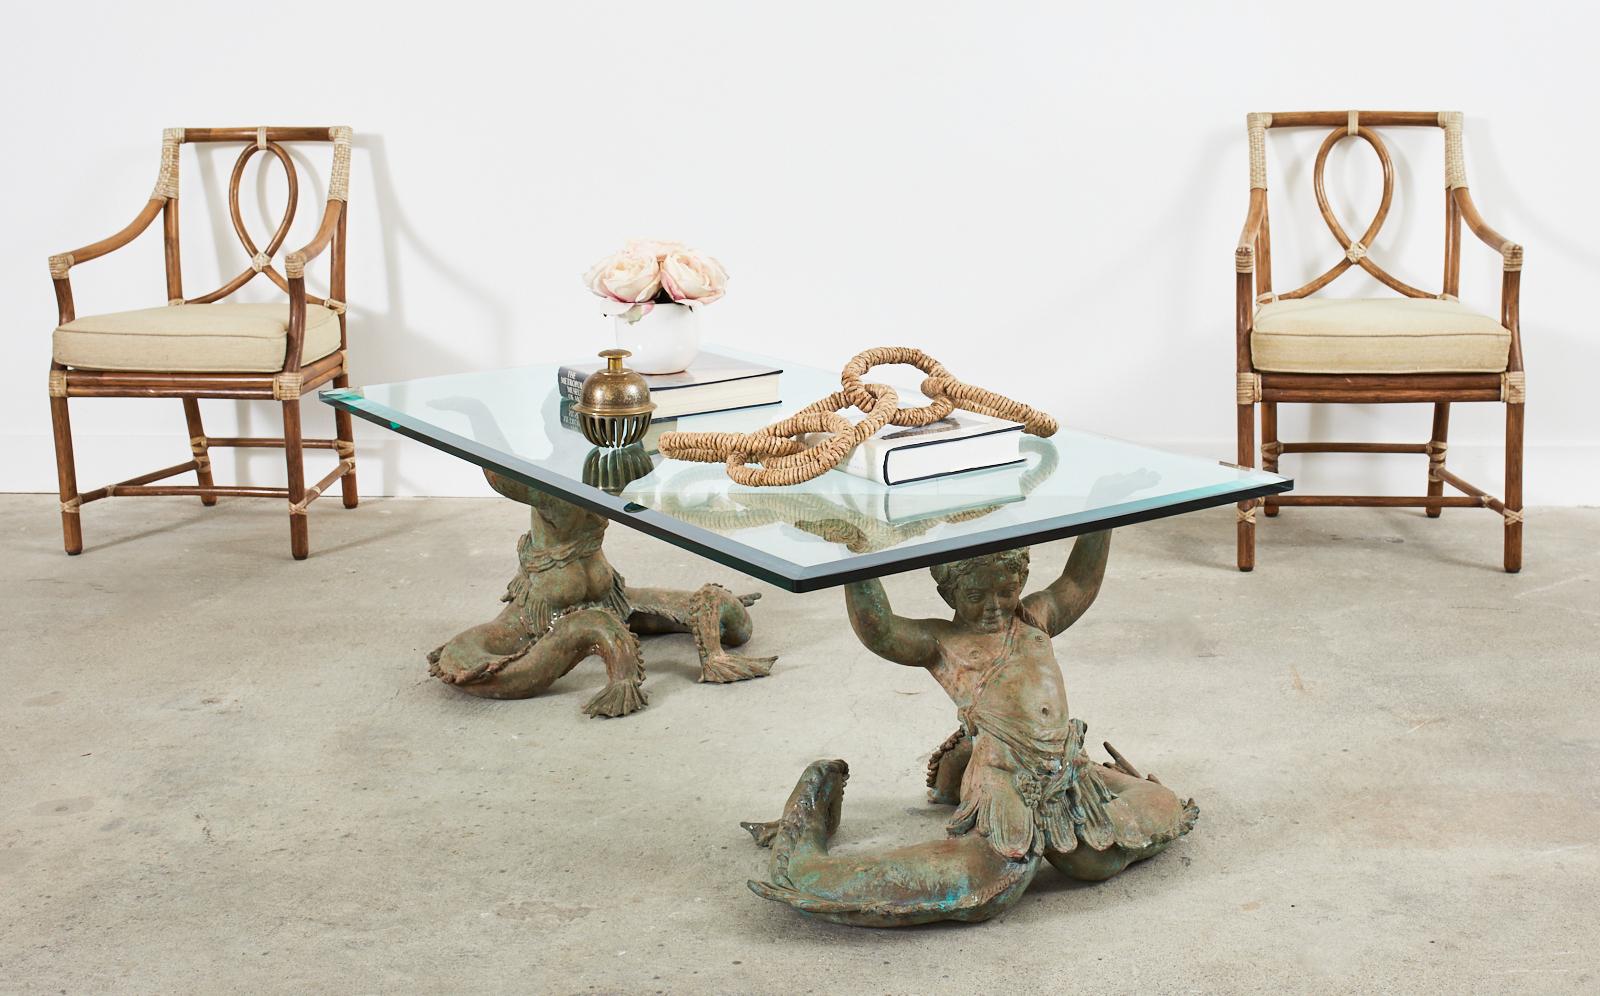 Fantastic Italian nautical cocktail table or coffee table featuring a pair of patinated bronze Putti Di Mare mermaids supporting a thick glass pane. The mythical grotto style cherub mermaids are unattached which is very unique as most of these pairs